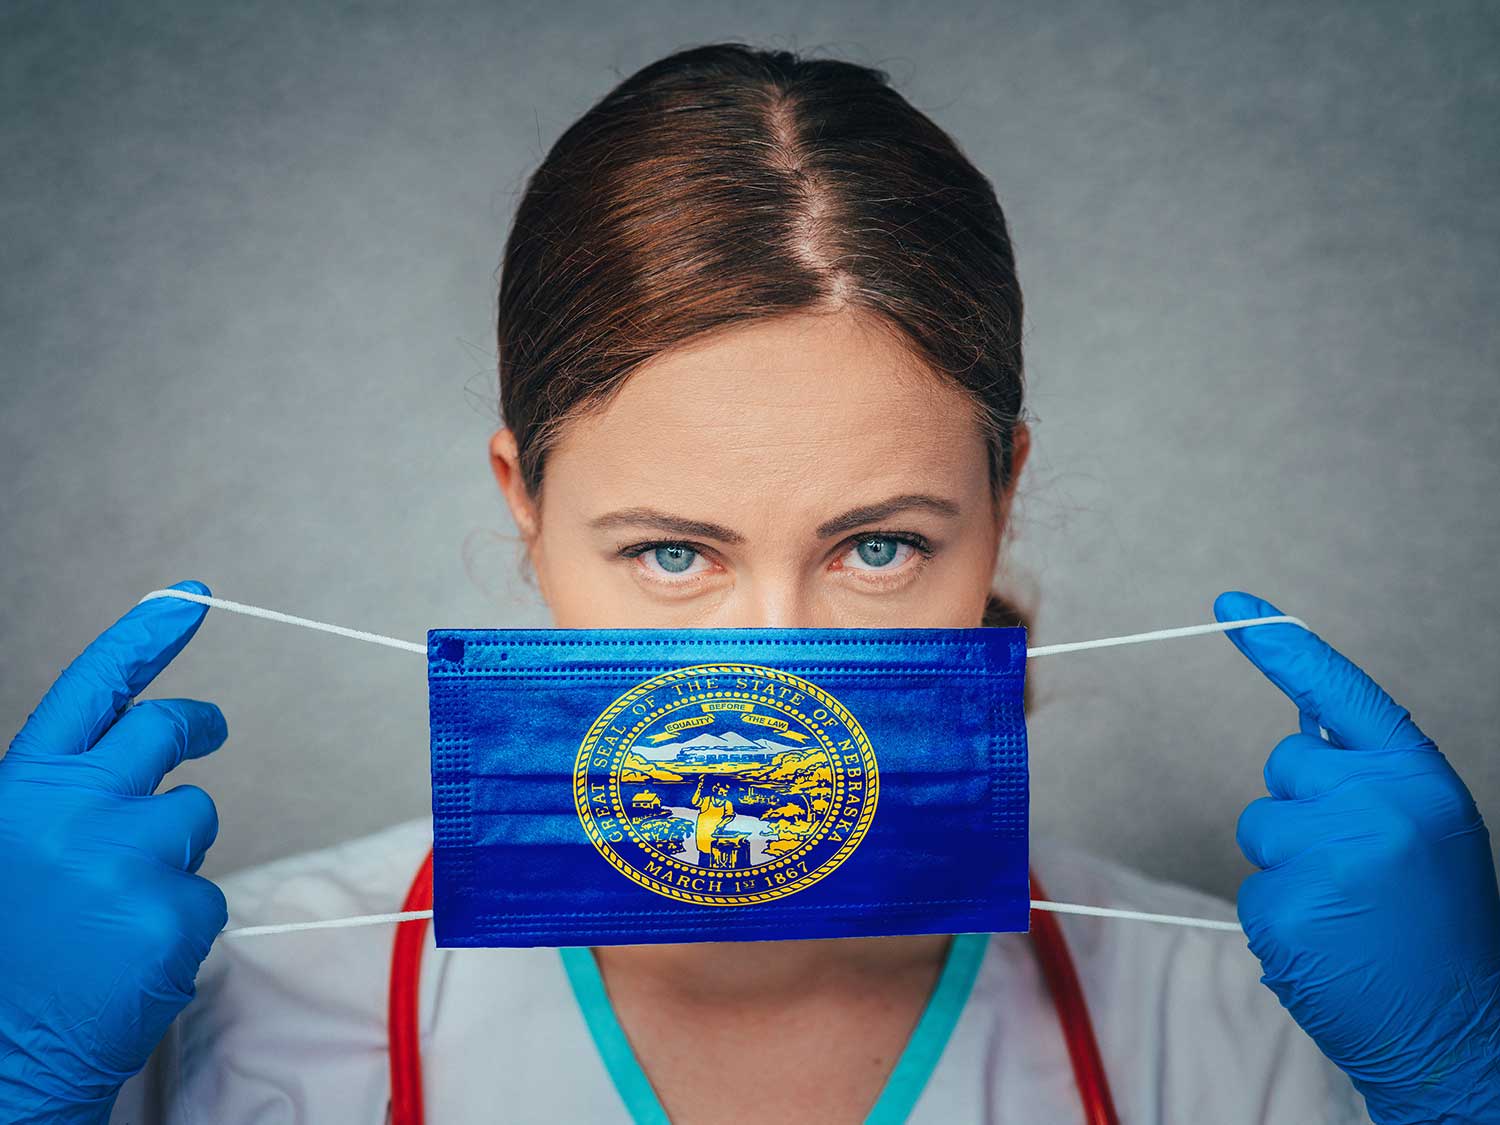 A Female Doctor With Medical Malpractice Insurance Holding A Nebraska State Flag Surgical Mask Over Her Face